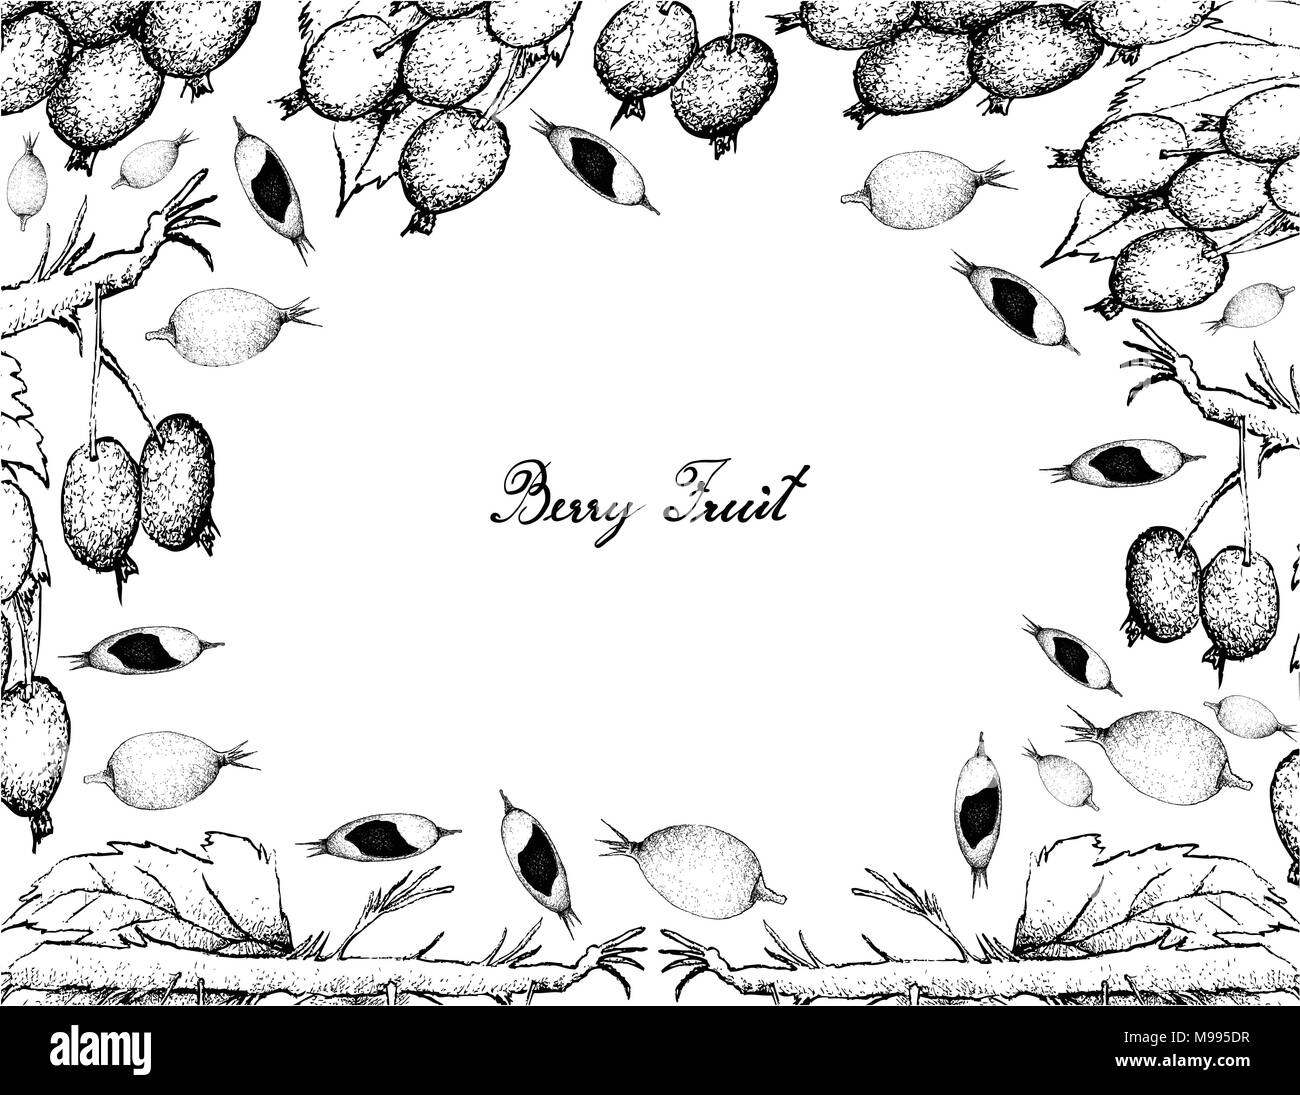 Berry Fruits, Illustration Frame of Hand Drawn Sketch Delicious Fresh Blackberries and Blackberry Jam Fruit or Rosenbergiodendron Formosum Isolated on Stock Vector